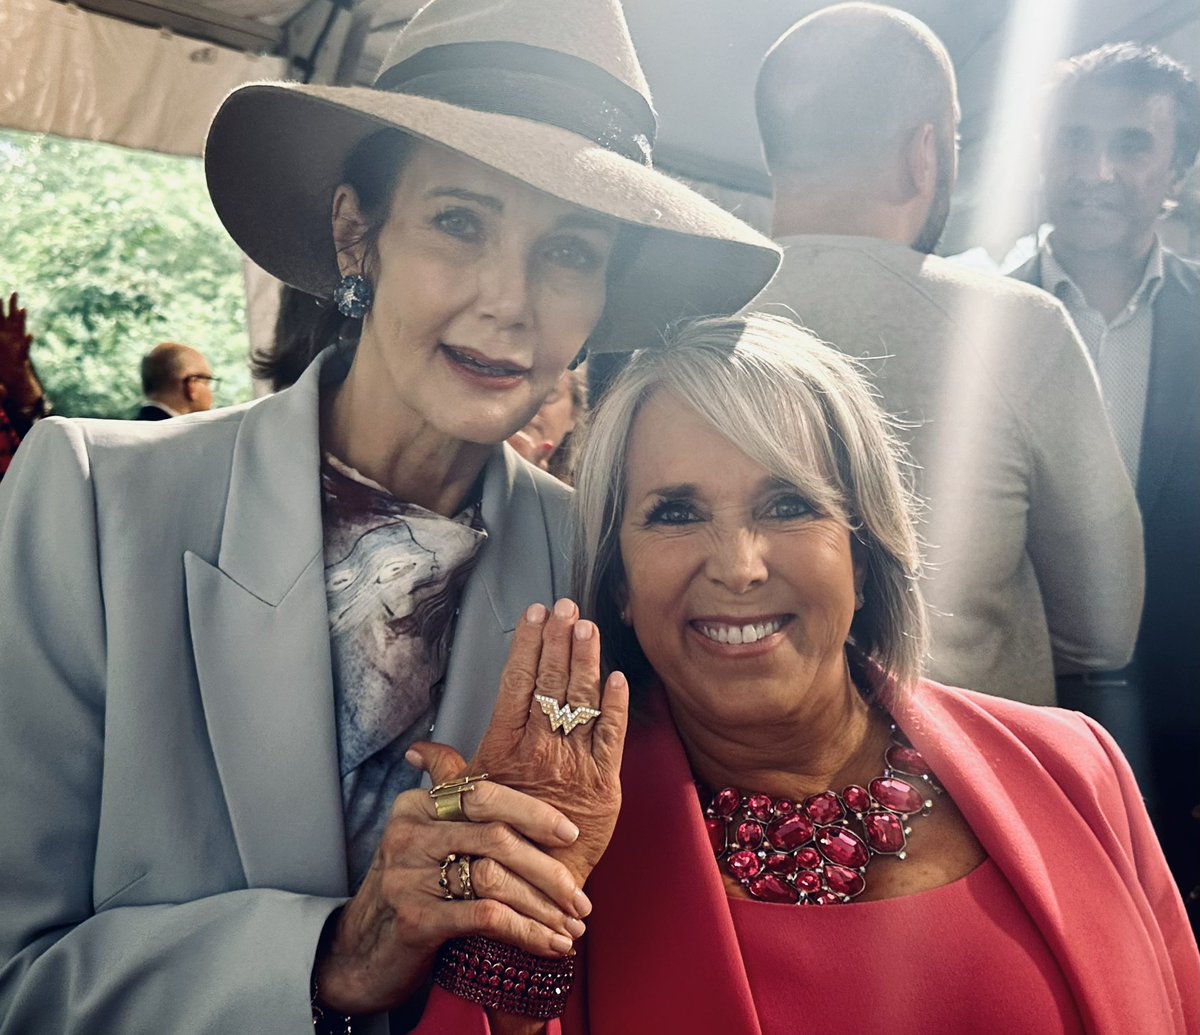 So much fun meeting @RealLyndaCarter and showing her my #WonderWoman ring @haddadmedia’s fabulous garden party today! Next — off to the White House Correspondent’s Dinner with @POTUS tonight!